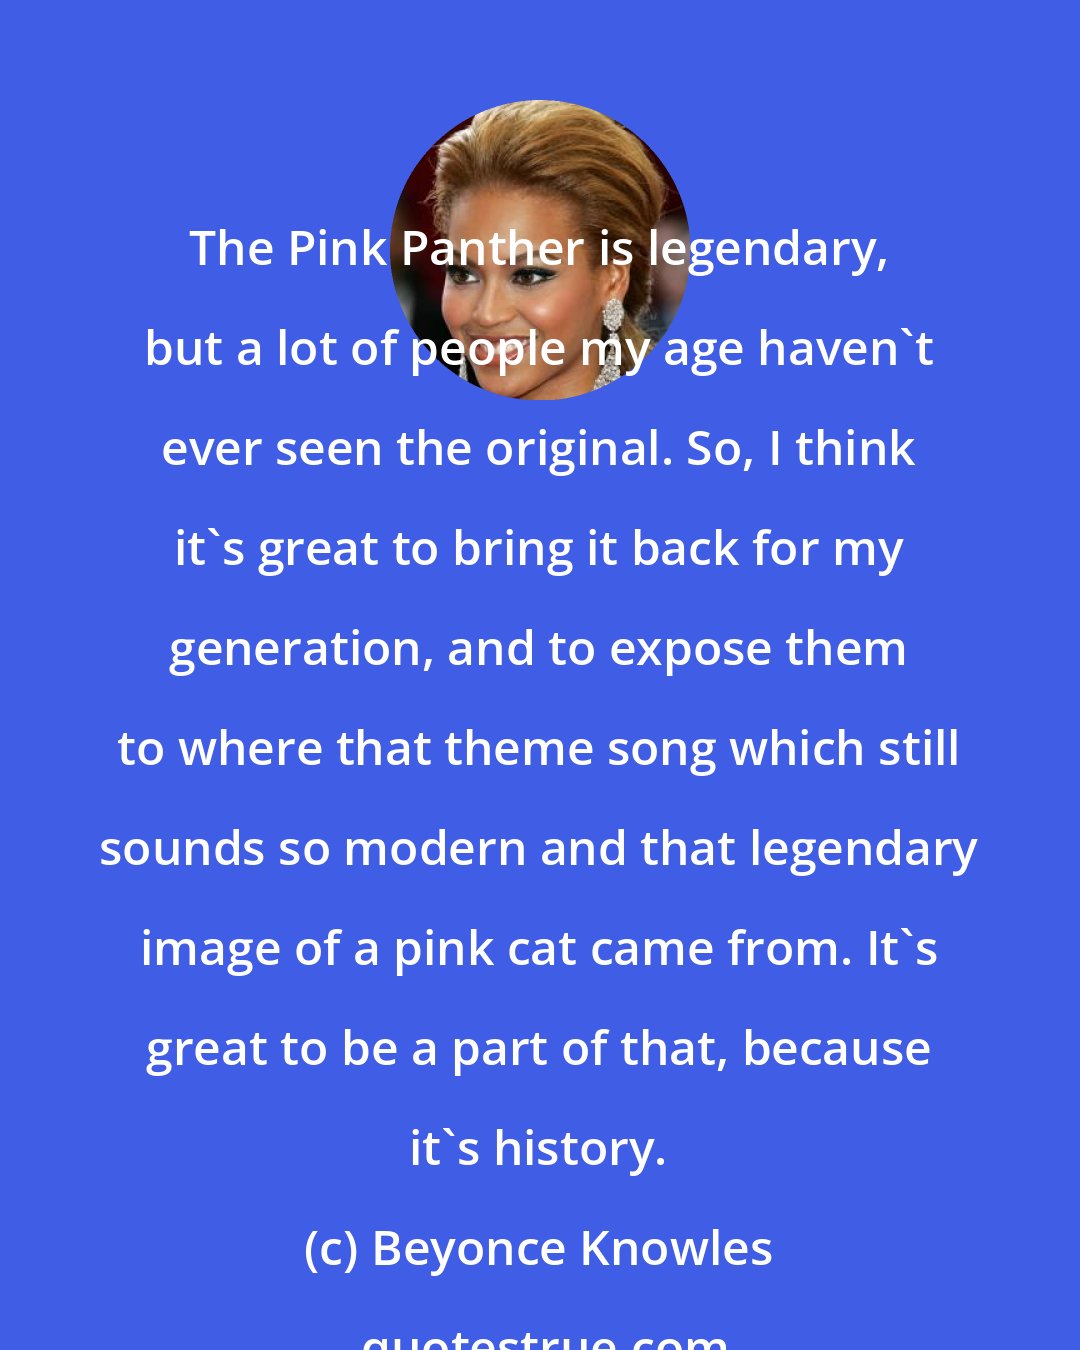 Beyonce Knowles: The Pink Panther is legendary, but a lot of people my age haven't ever seen the original. So, I think it's great to bring it back for my generation, and to expose them to where that theme song which still sounds so modern and that legendary image of a pink cat came from. It's great to be a part of that, because it's history.